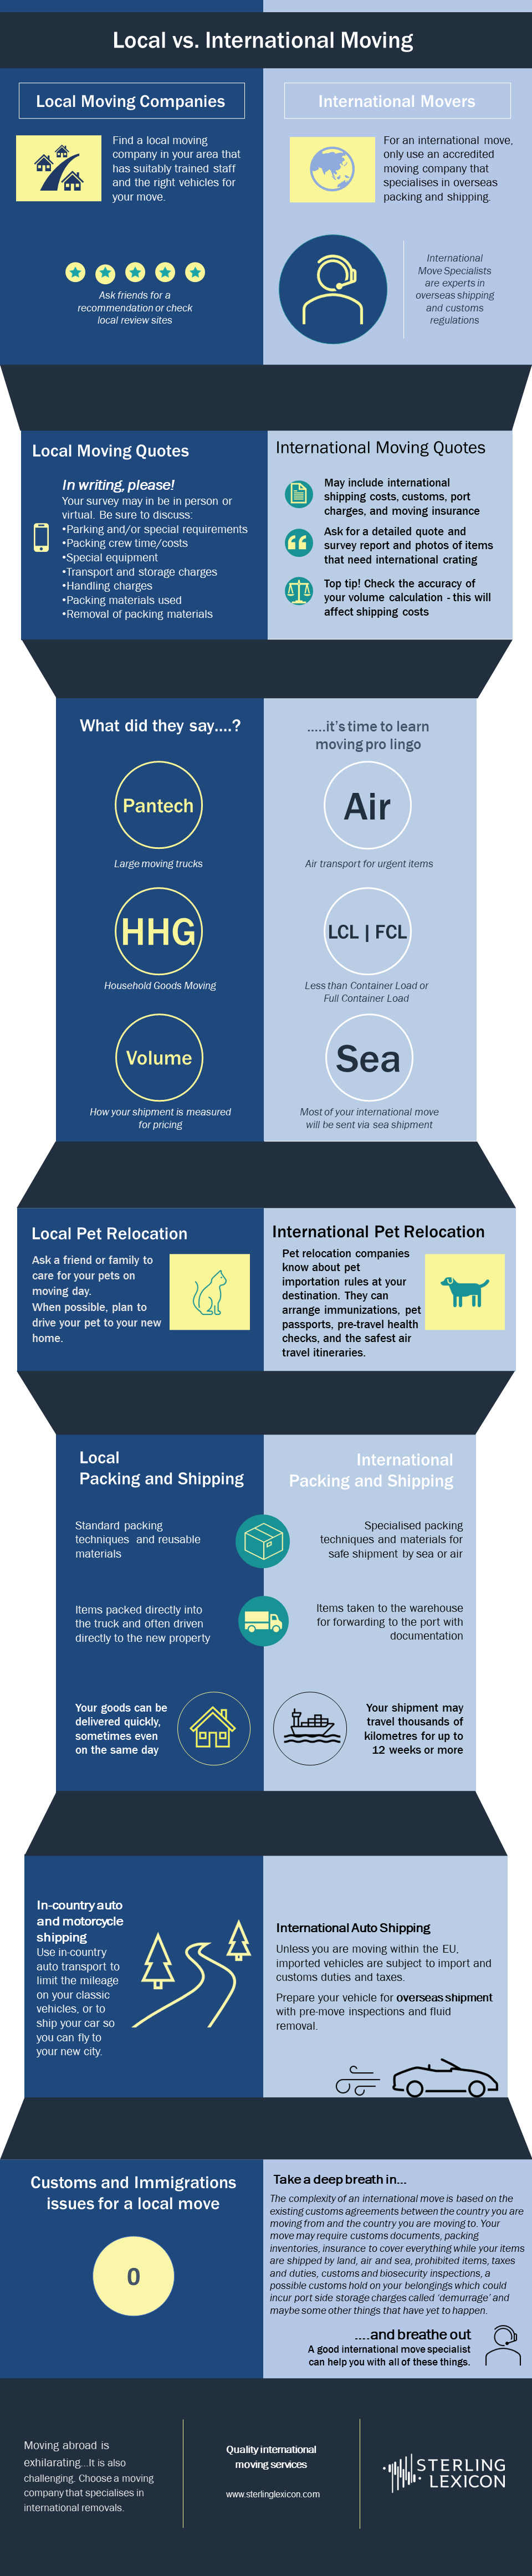 Local V International Moving Infographic Final